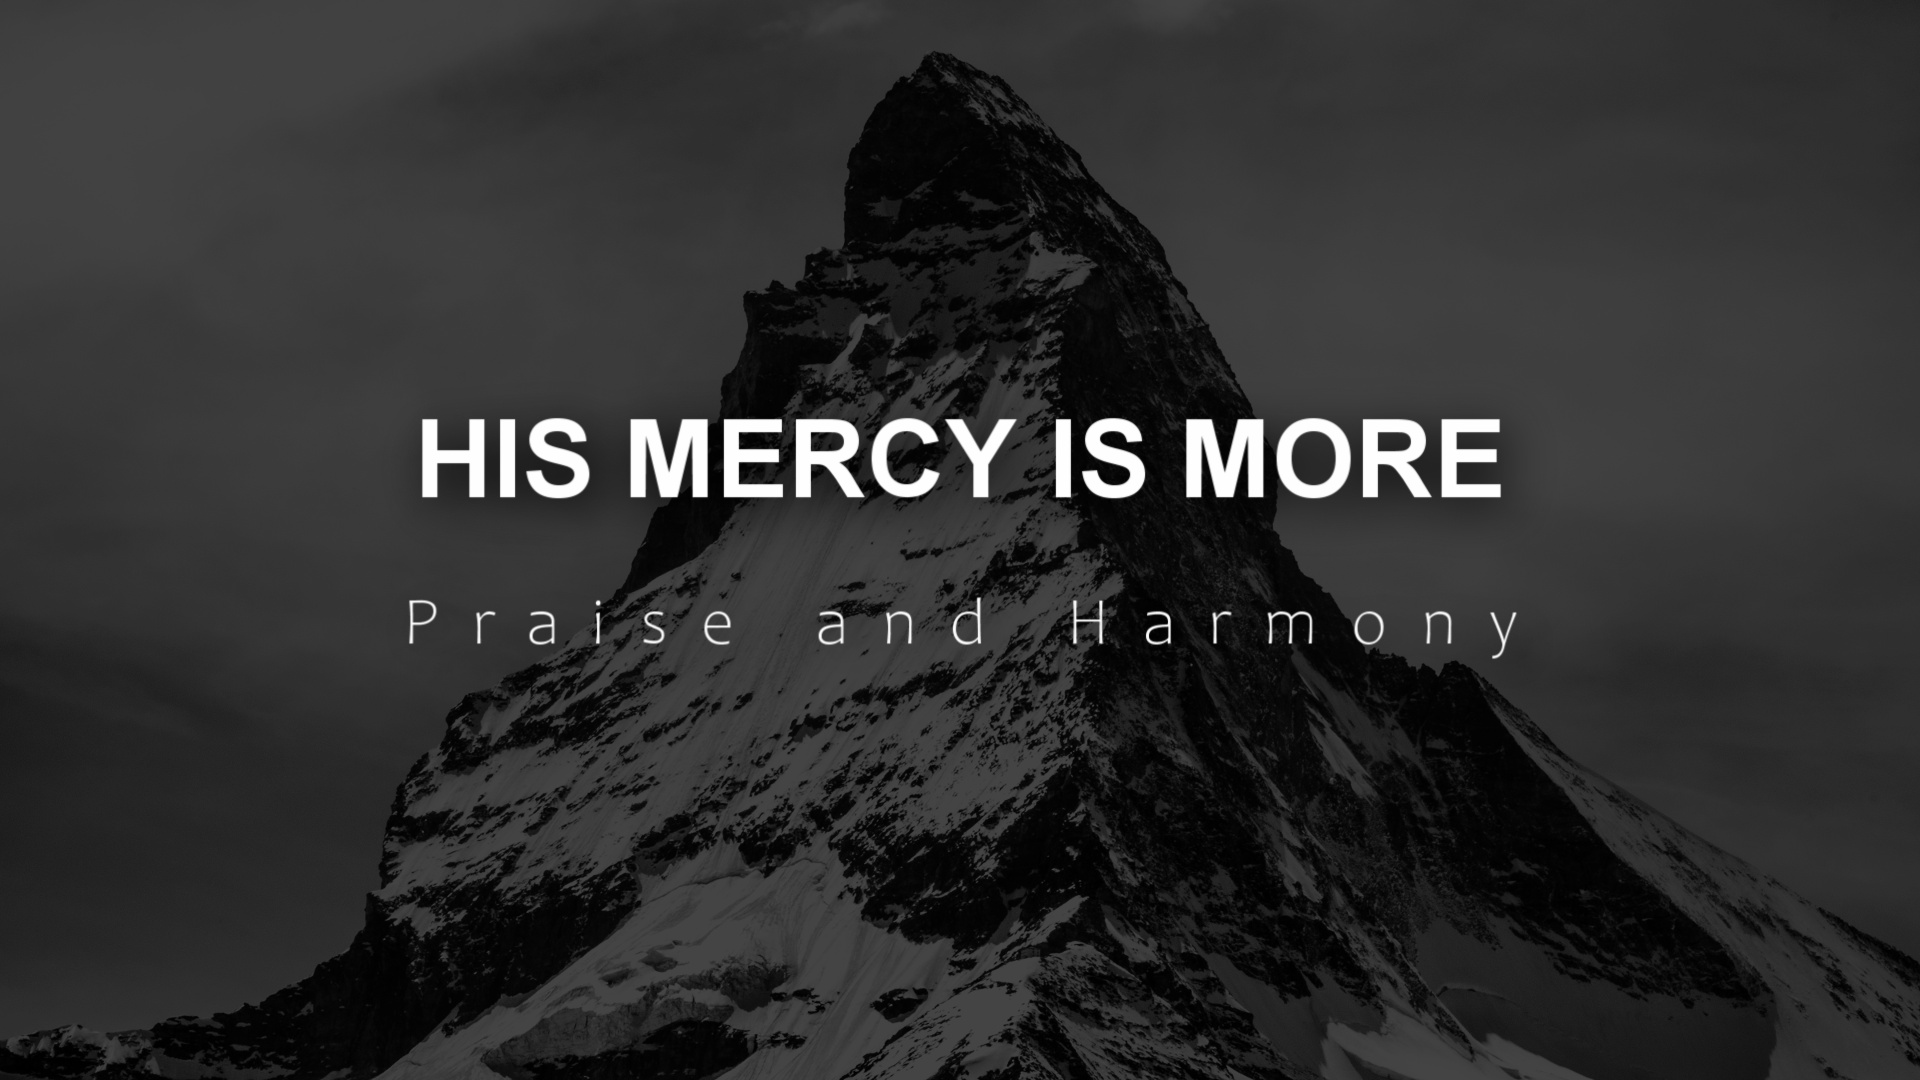 His mercy is more